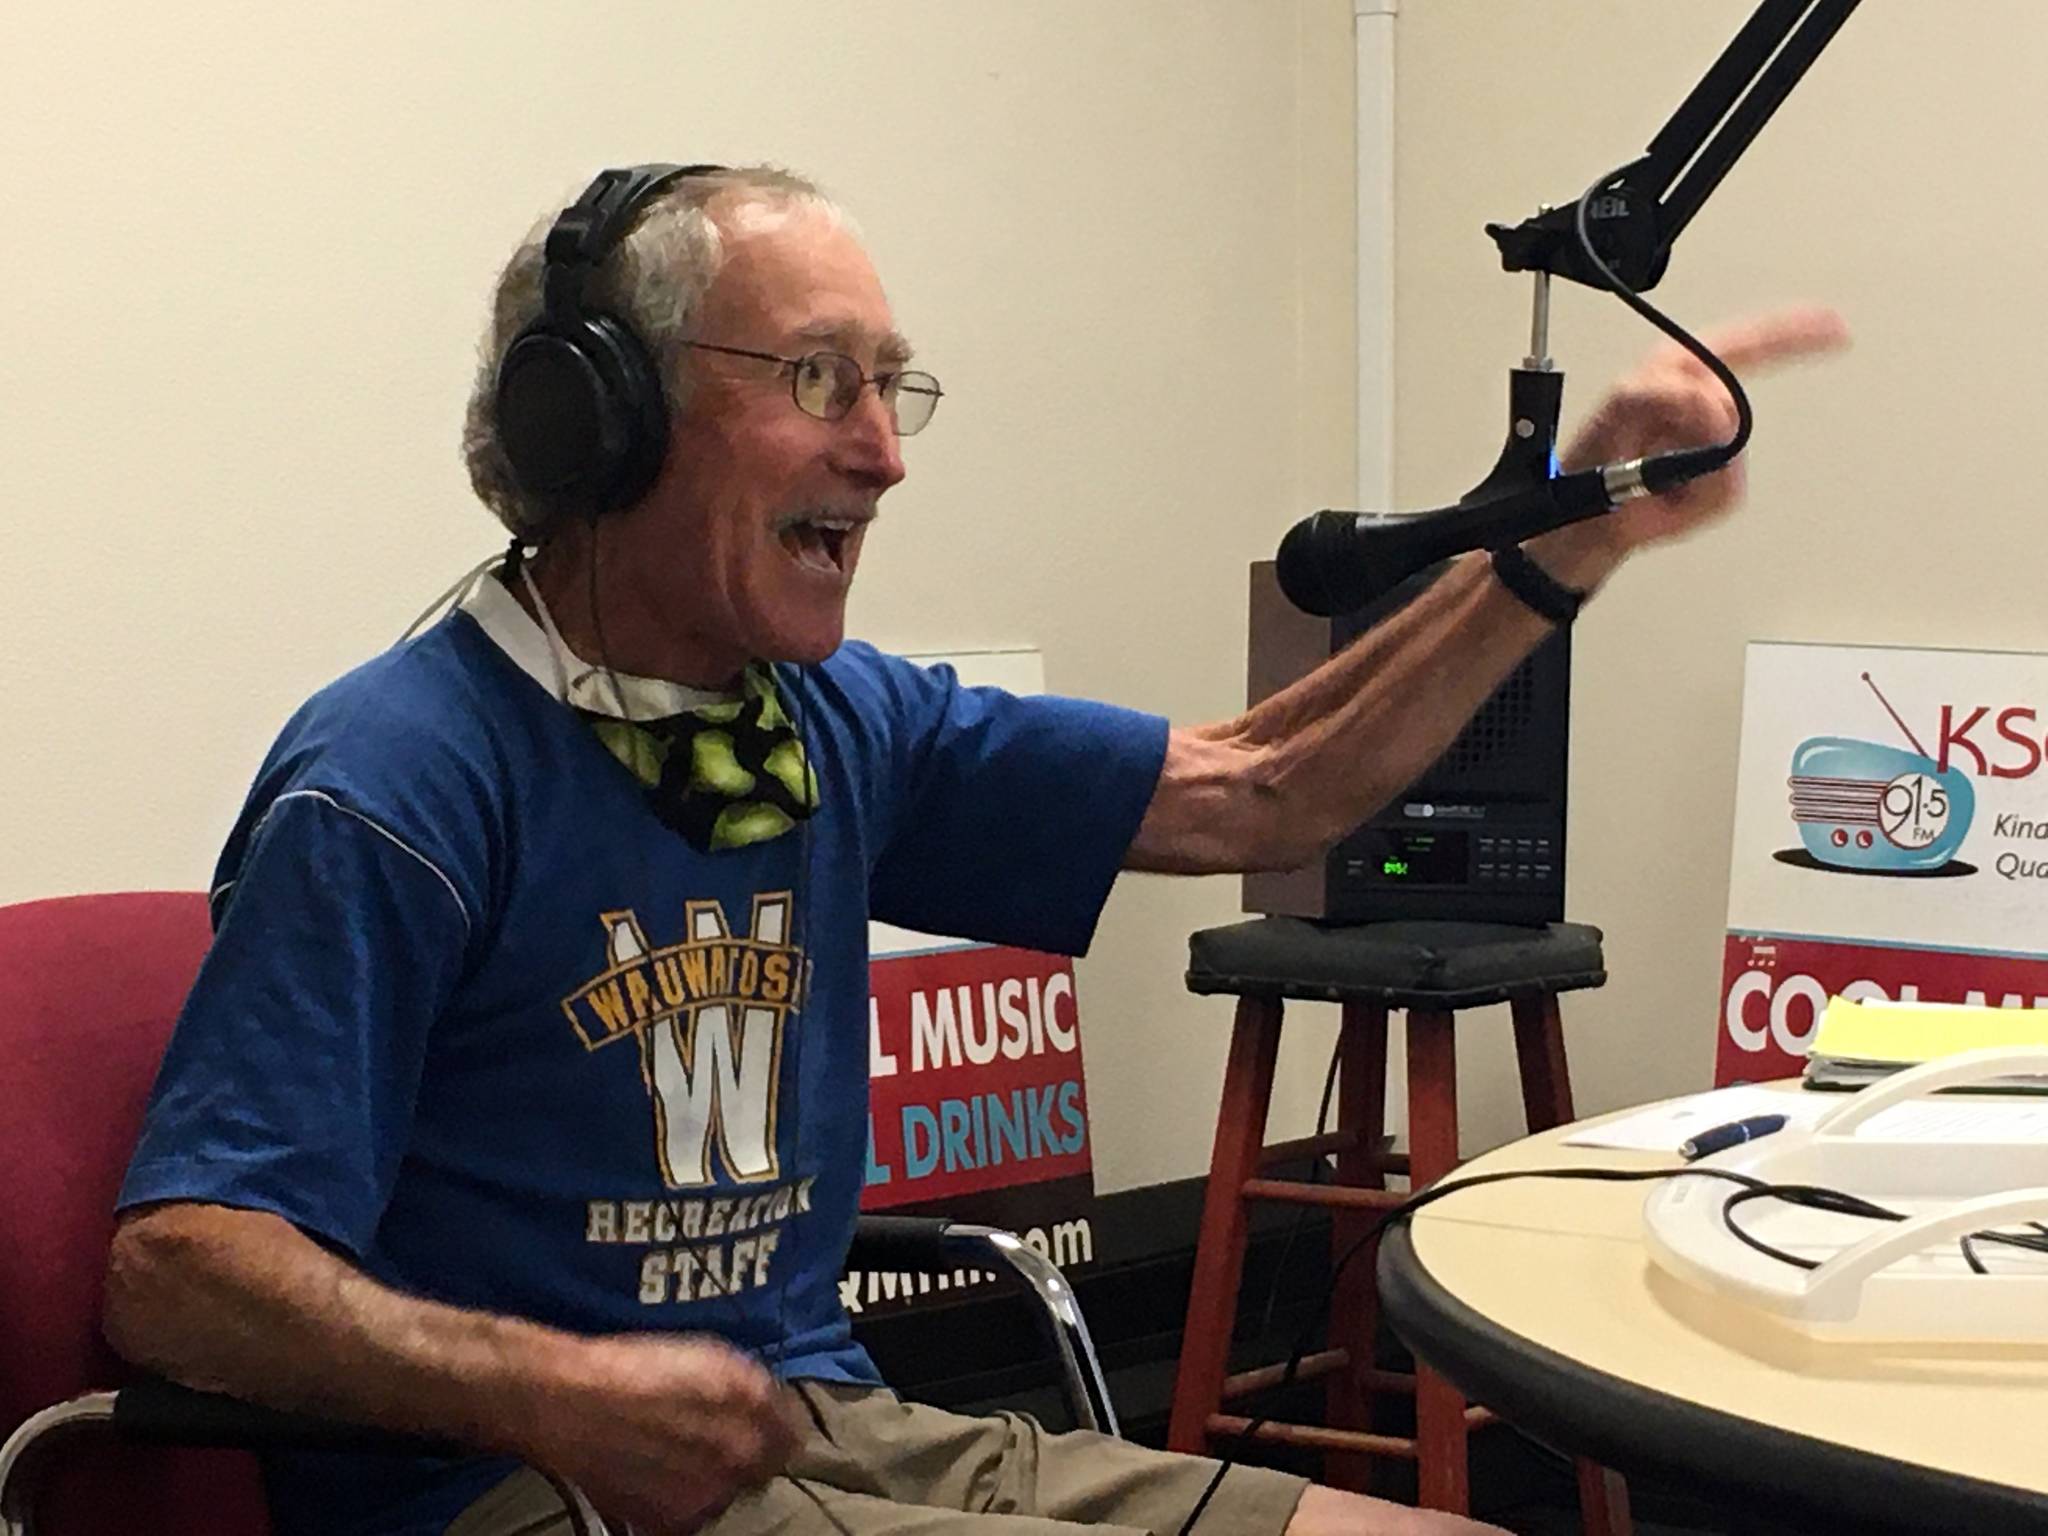 Gardening personality Ciscoe Morris joined KSQM 91.5 FM last Saturday for his first show of “Gardening with Ciscoe.” It broadcasts each Saturday at 9 a.m. Sequim Gazette photo by Matthew Nash